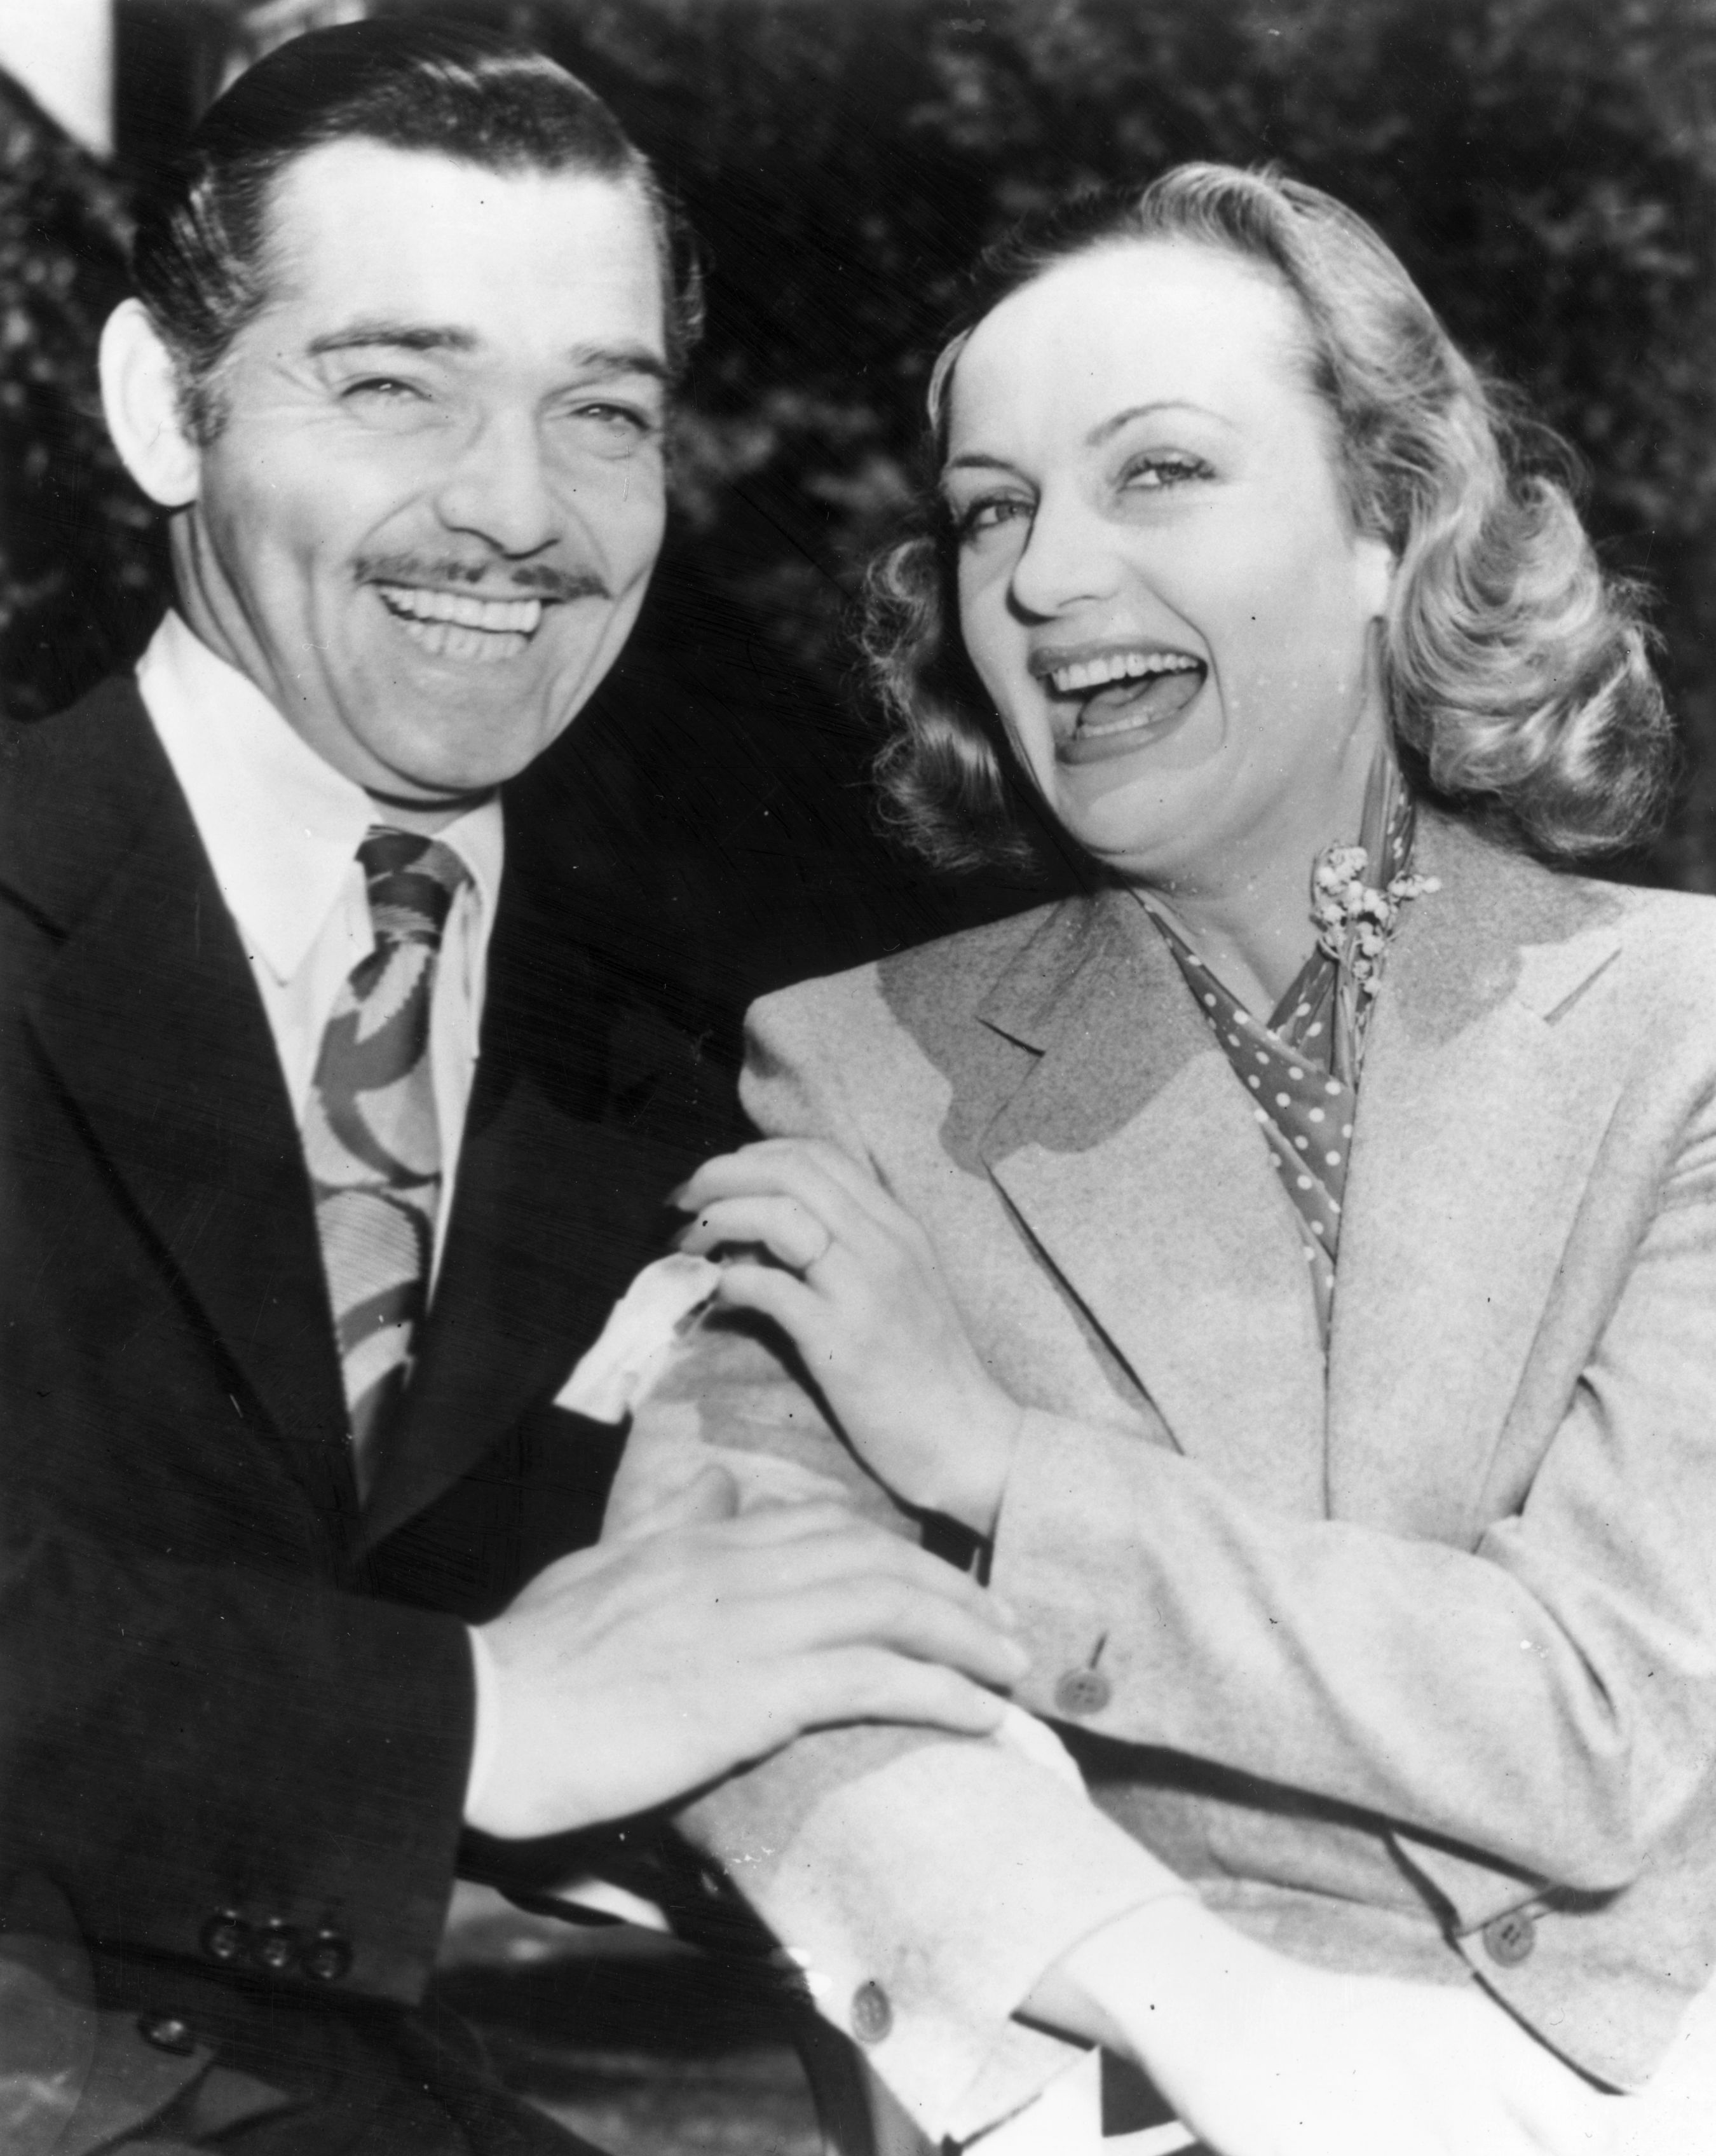 Clark Gable and Carole Lombard posing together on February 10, 1939, after their elopement | Photo: Getty Images